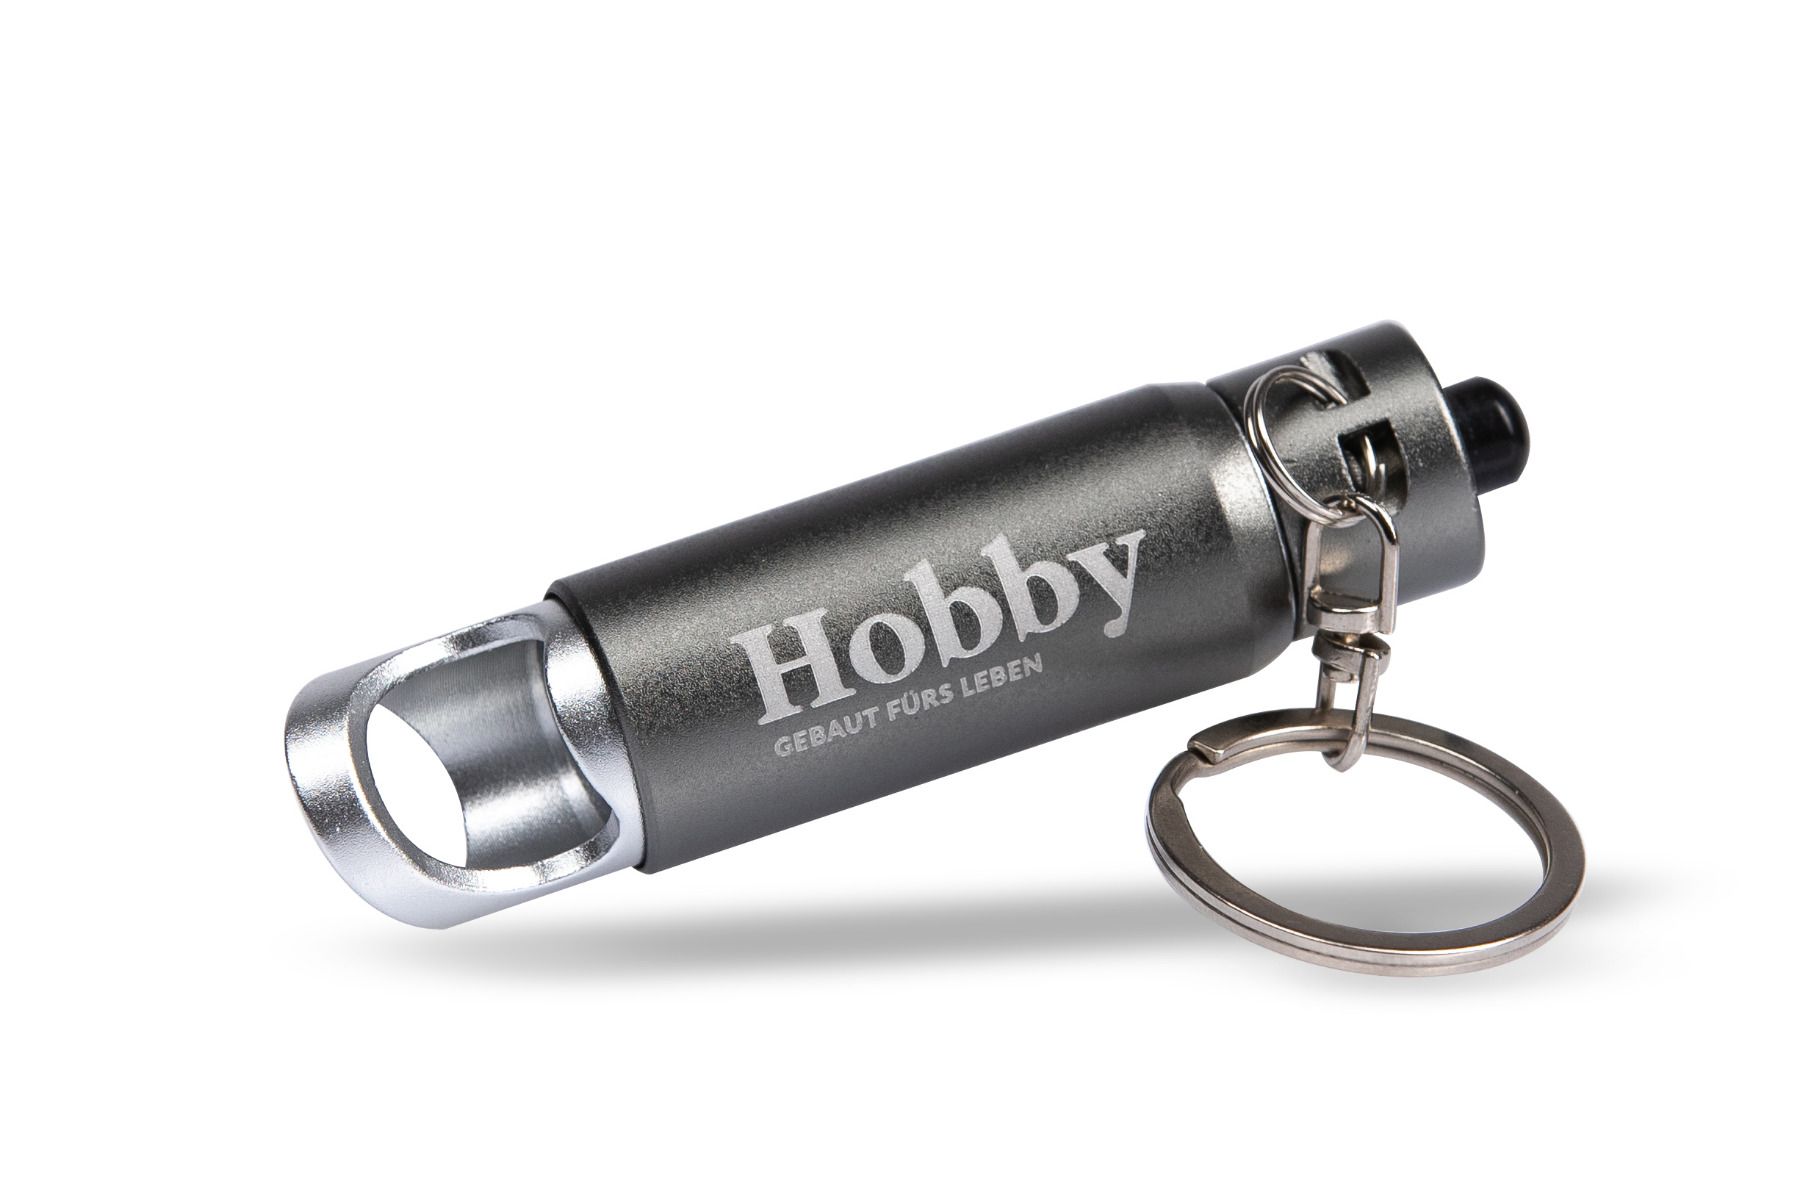 Hobby Keyring with LED Torch and Bottle Opener